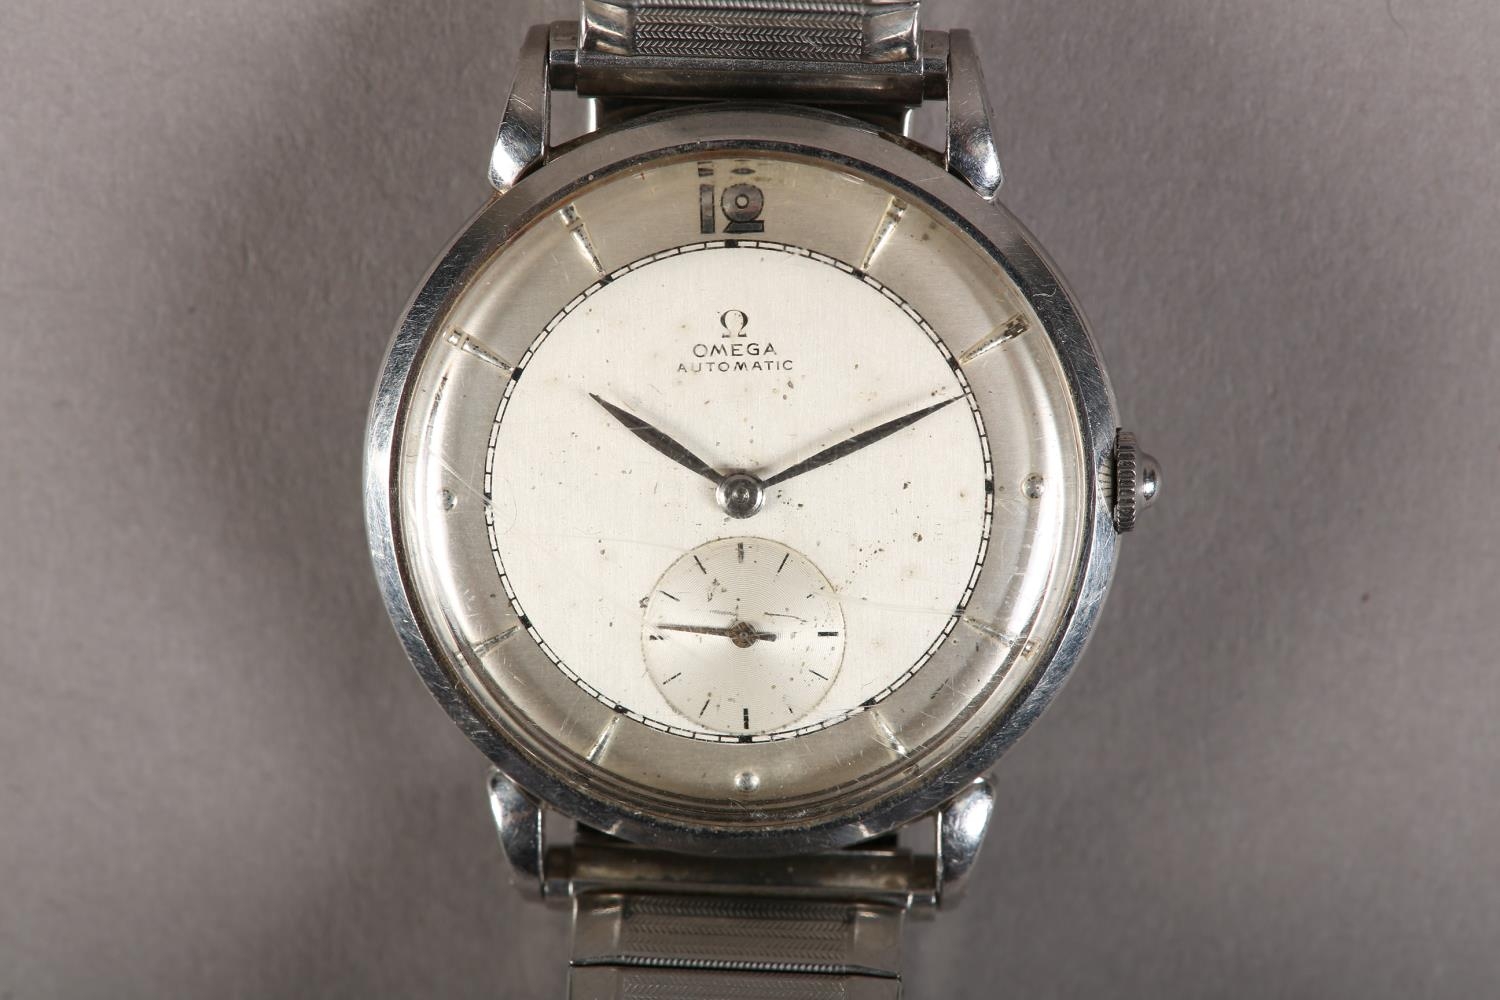 AN OMEGA GENTLEMAN'S AUTOMATIC WRIST WATCH c.1944 in stainless steel case no. 2398-1, 17 jewelled